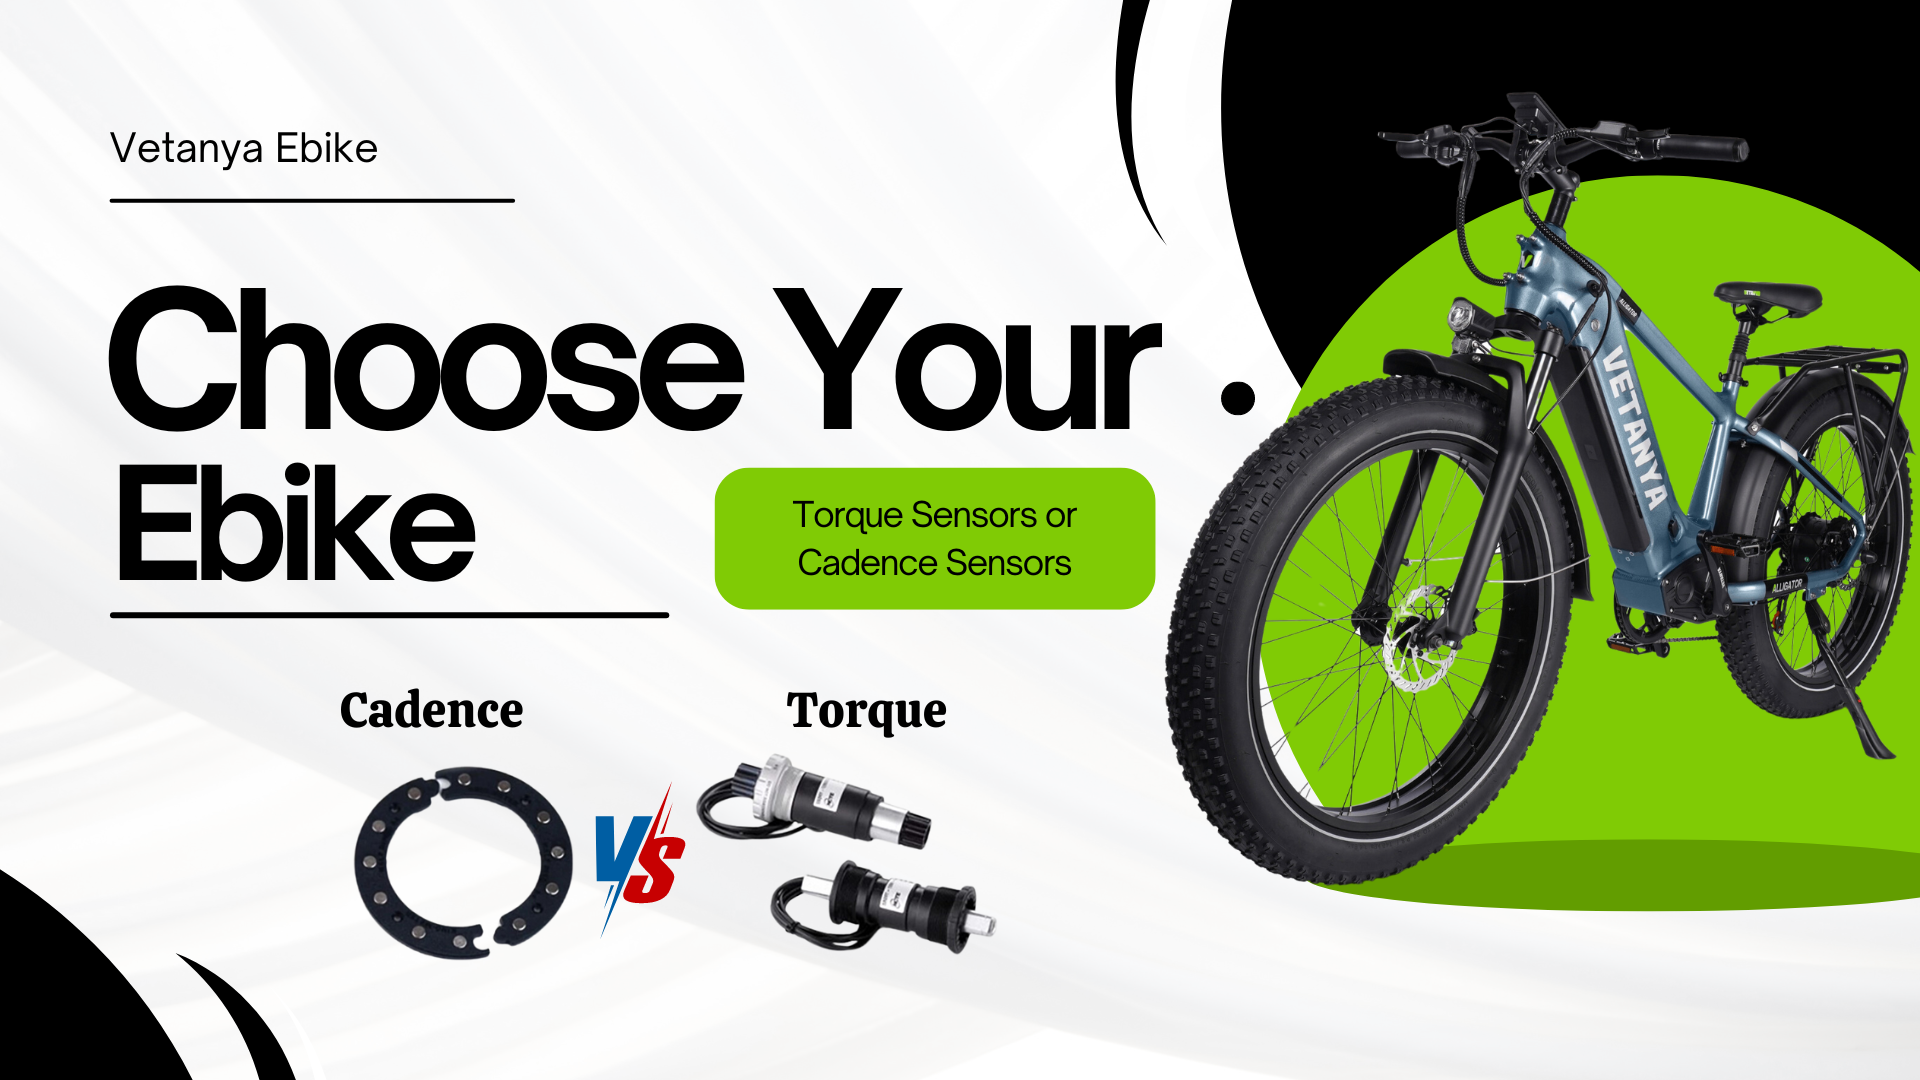 Torque Sensors or Cadence Sensors on Ebikes: Which One is Right for You?